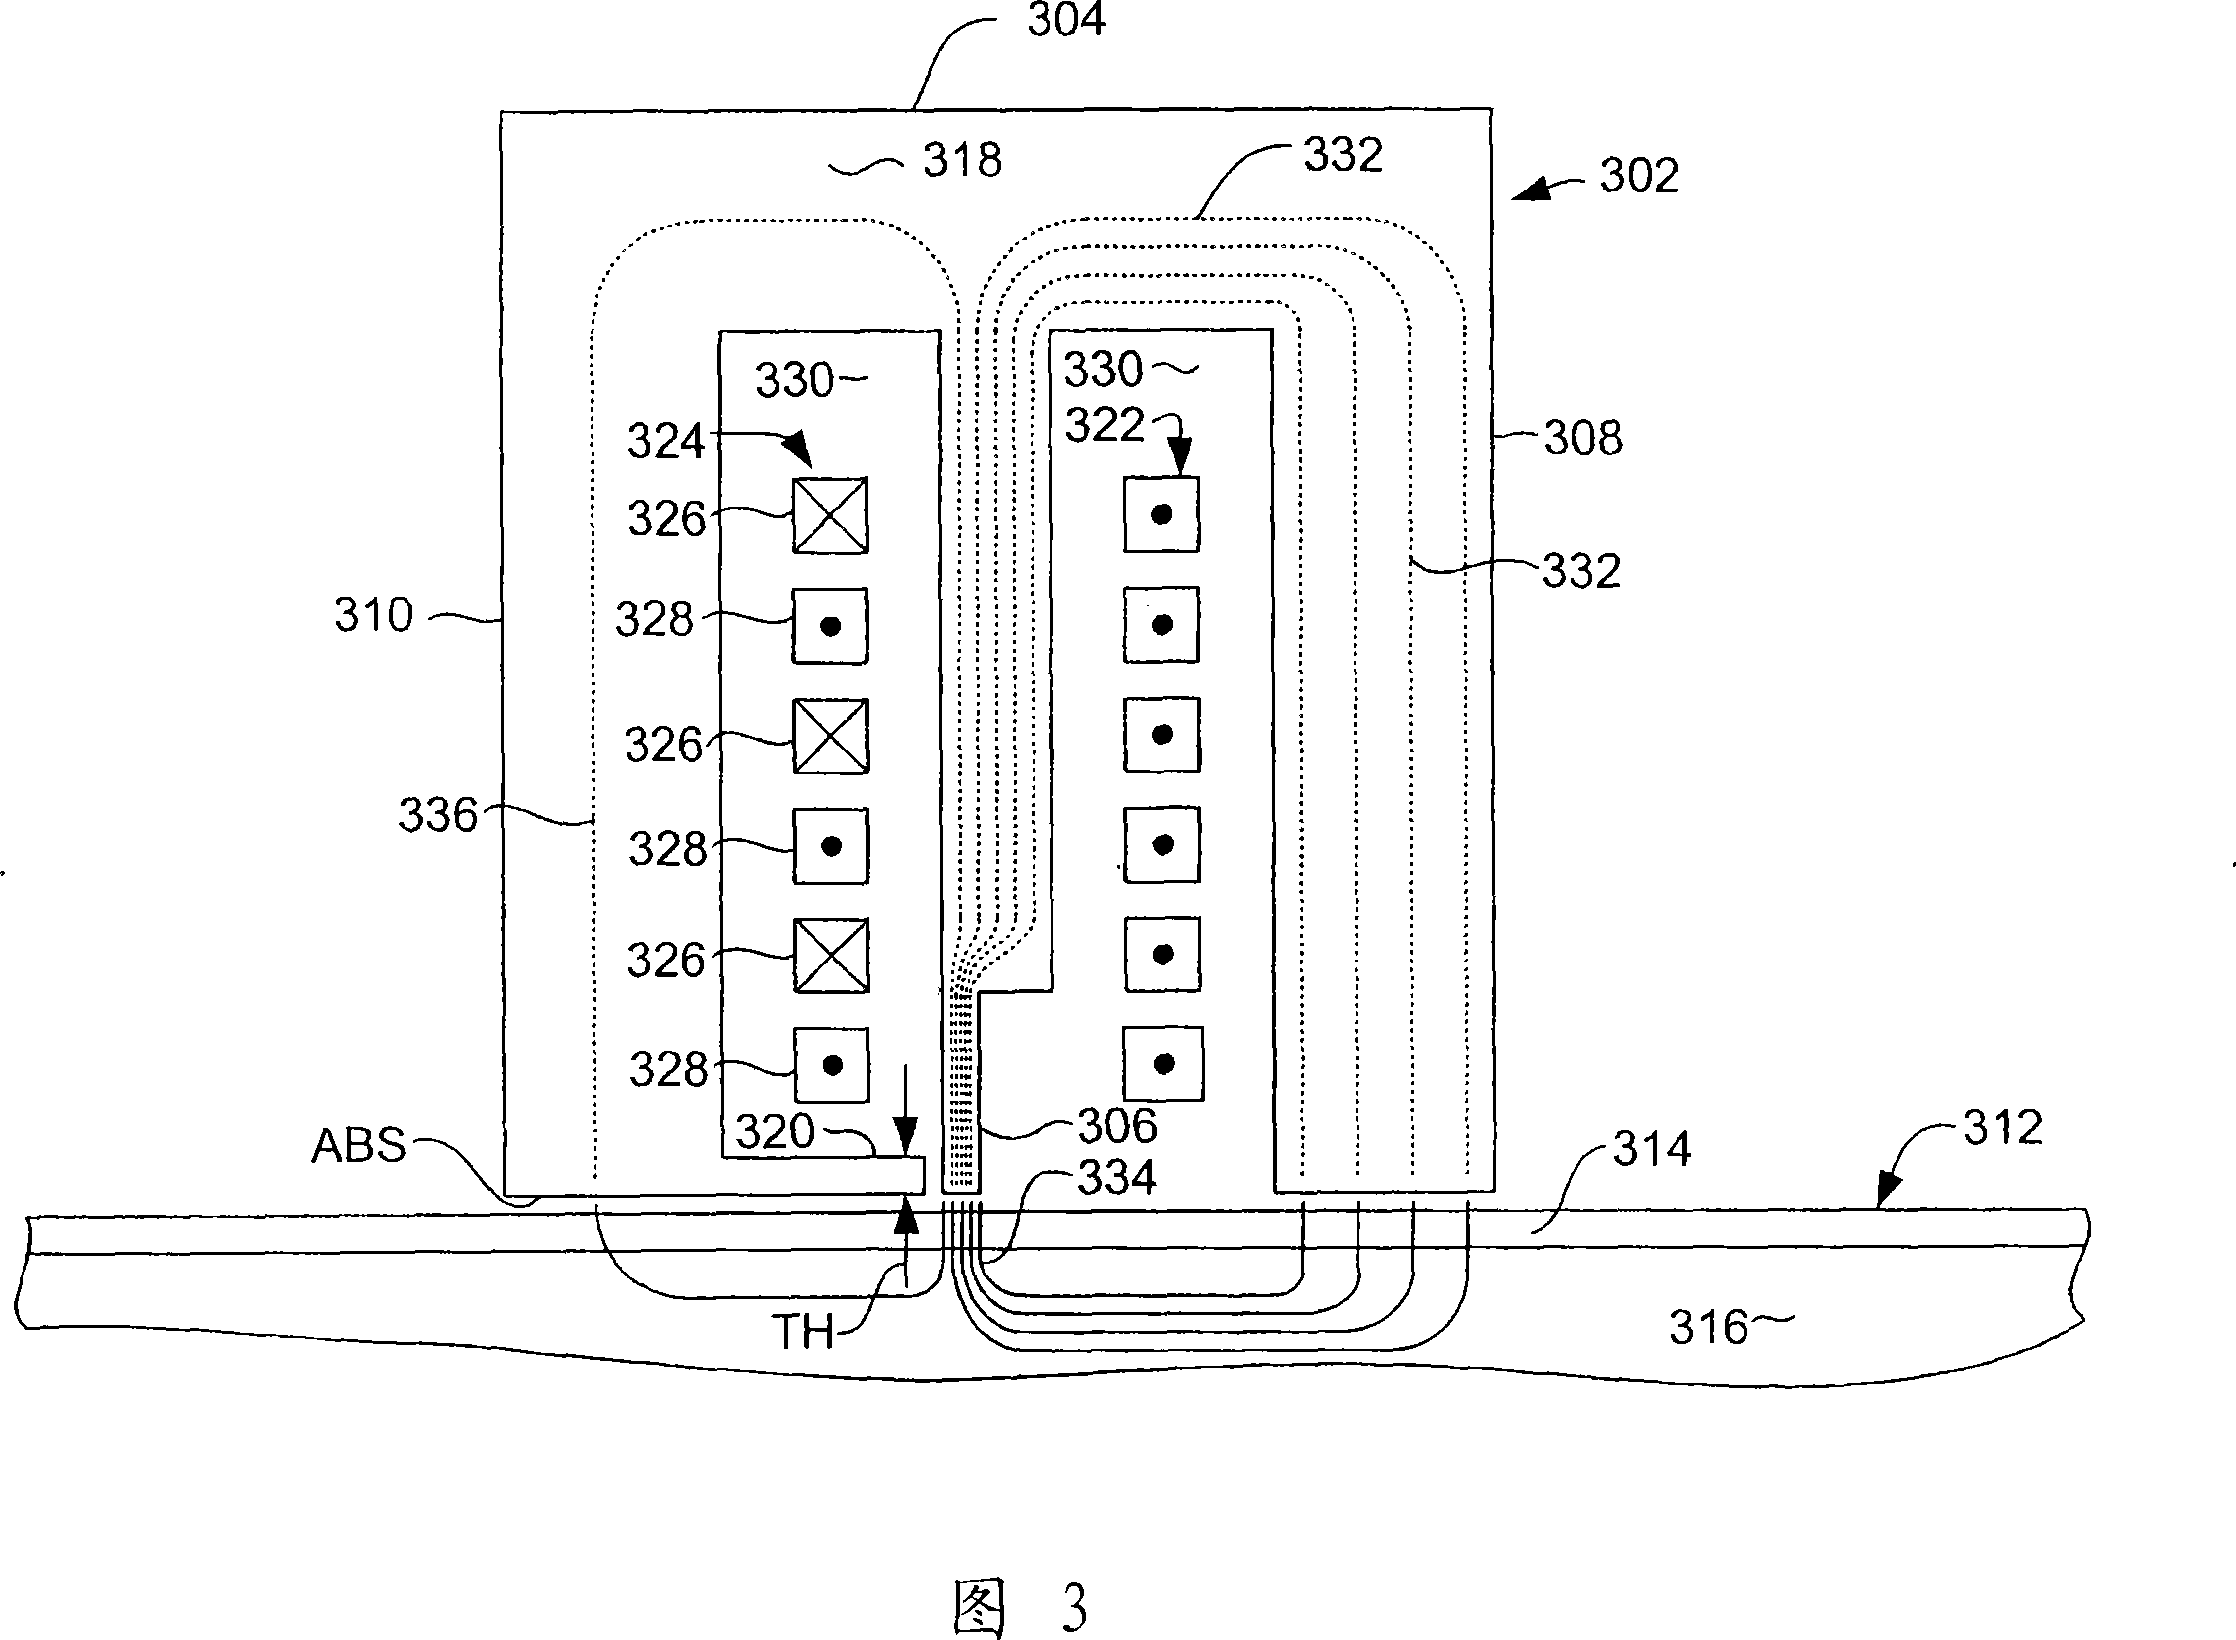 Magnetic write head employing multiple magnetomotive force sources